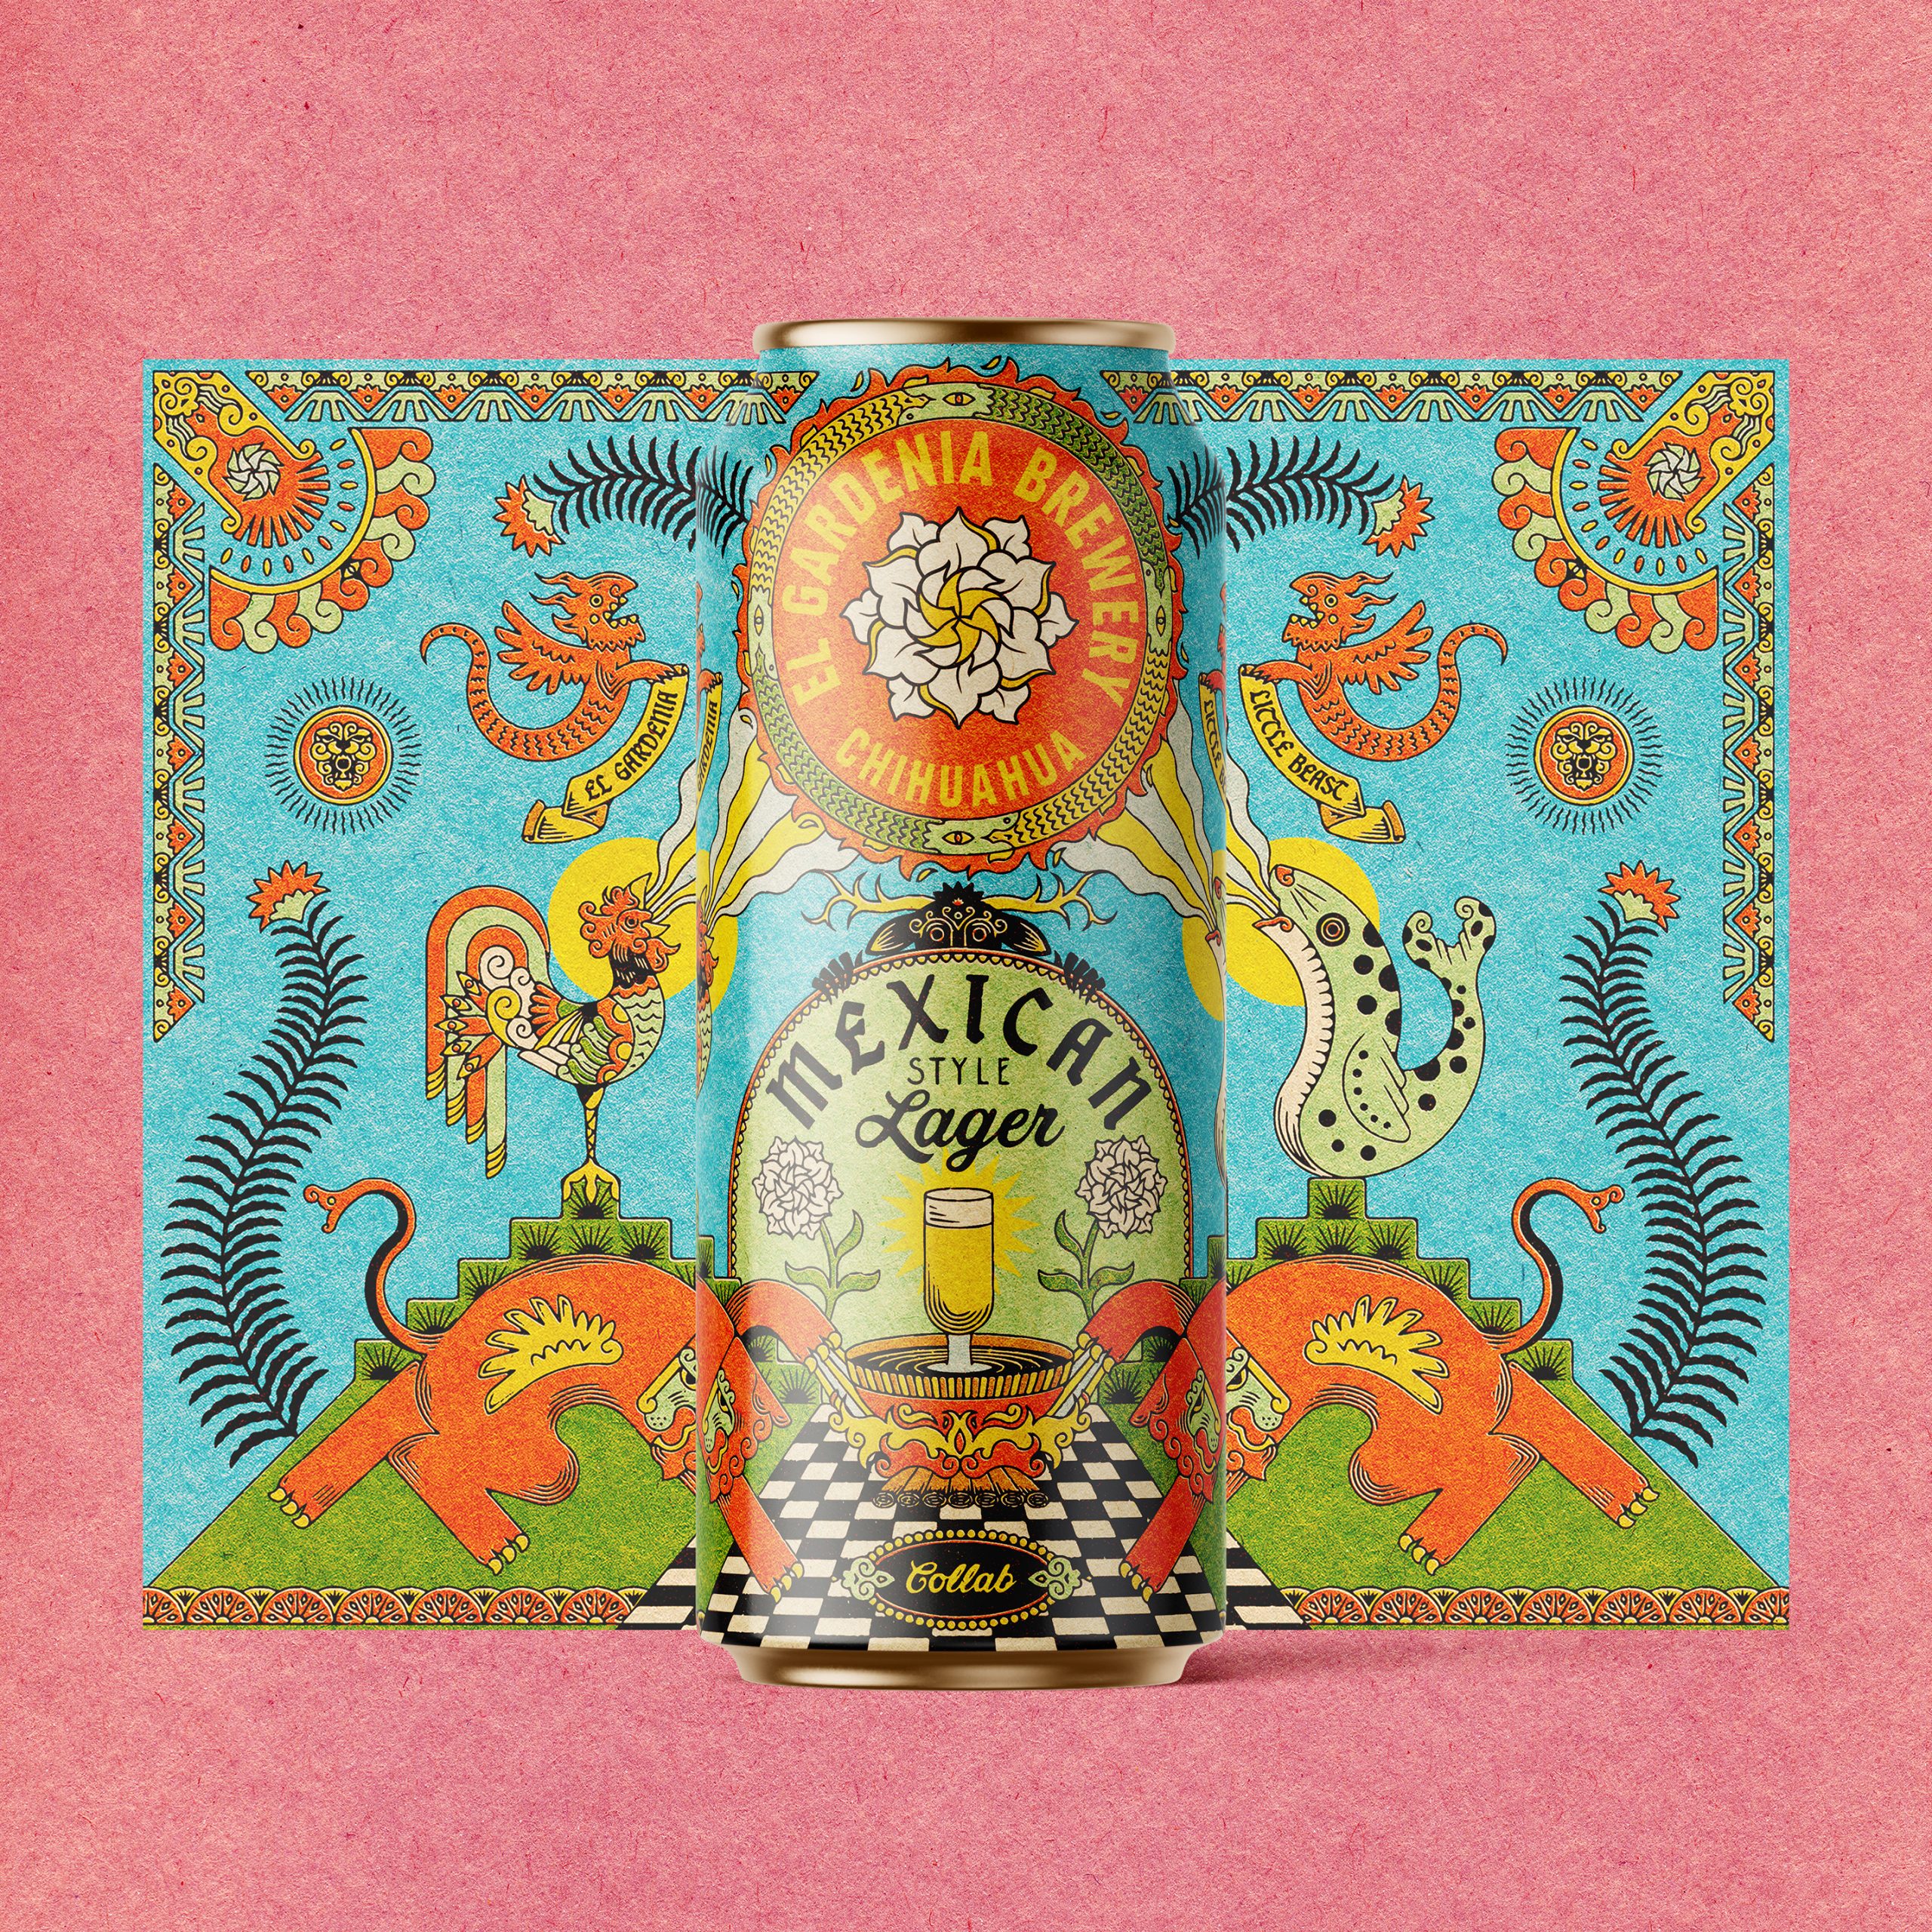 Gardenia Brewery’s Mexican Lager is Aflame with the Lush, Psychedelic Look of Old Tarot Cards